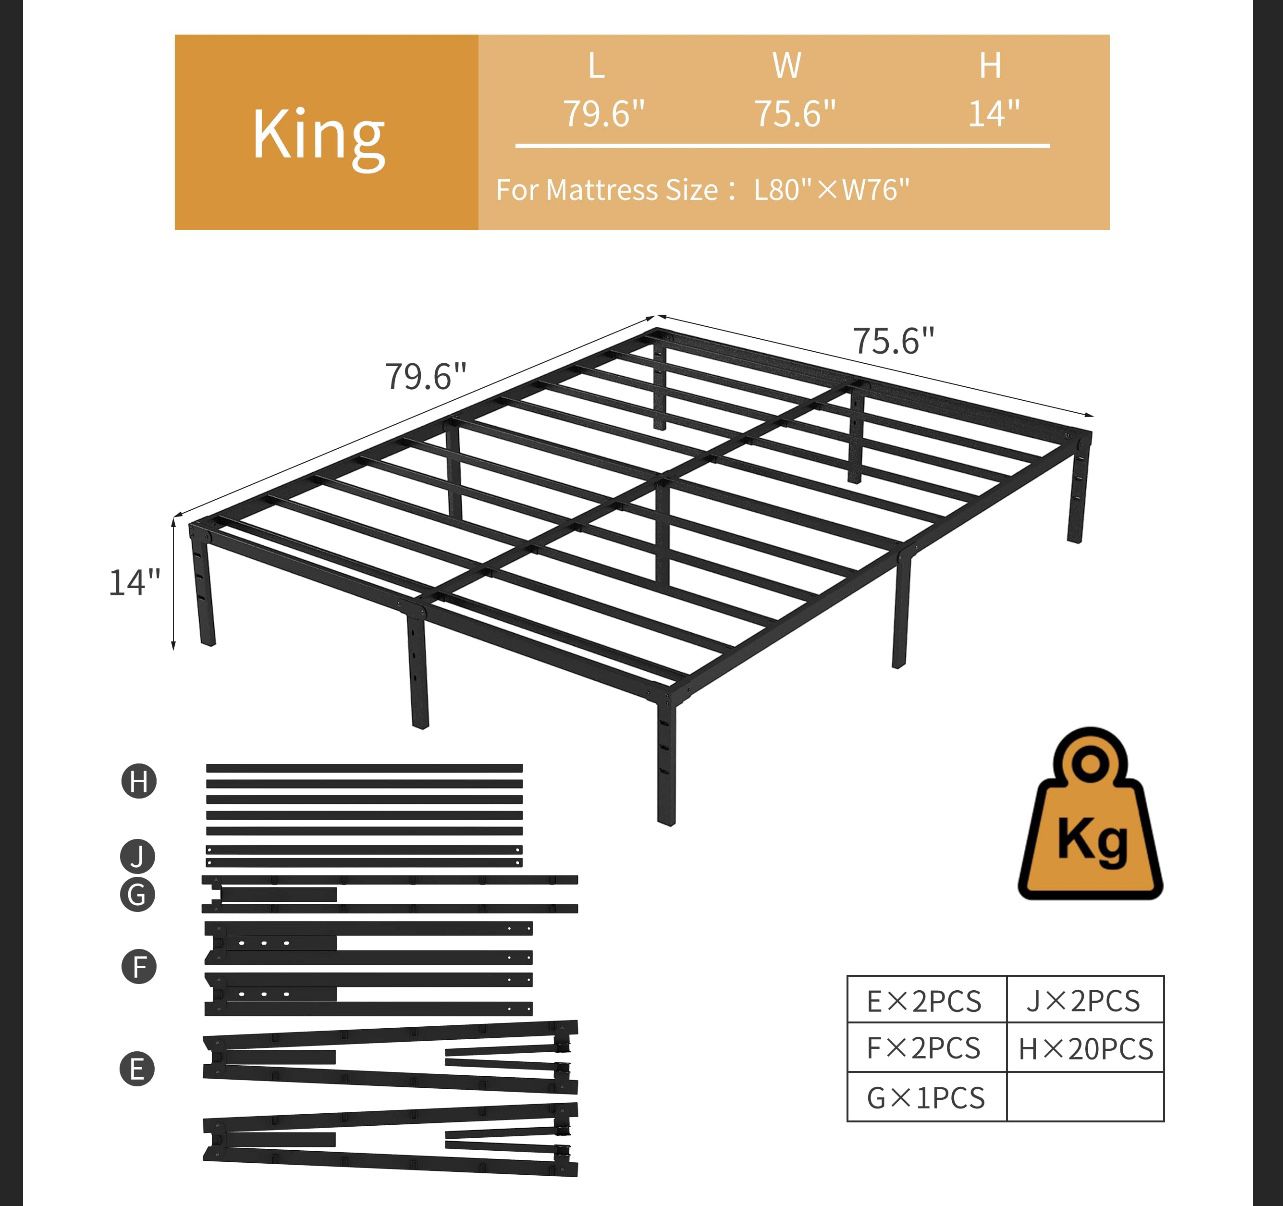 NEW JETO Metal Bed Frame-Simple and Atmospheric Metal Platform Bed Frame, Storage Space Under The Bed Heavy Duty Frame Bed, Durable King Size Bed Fram